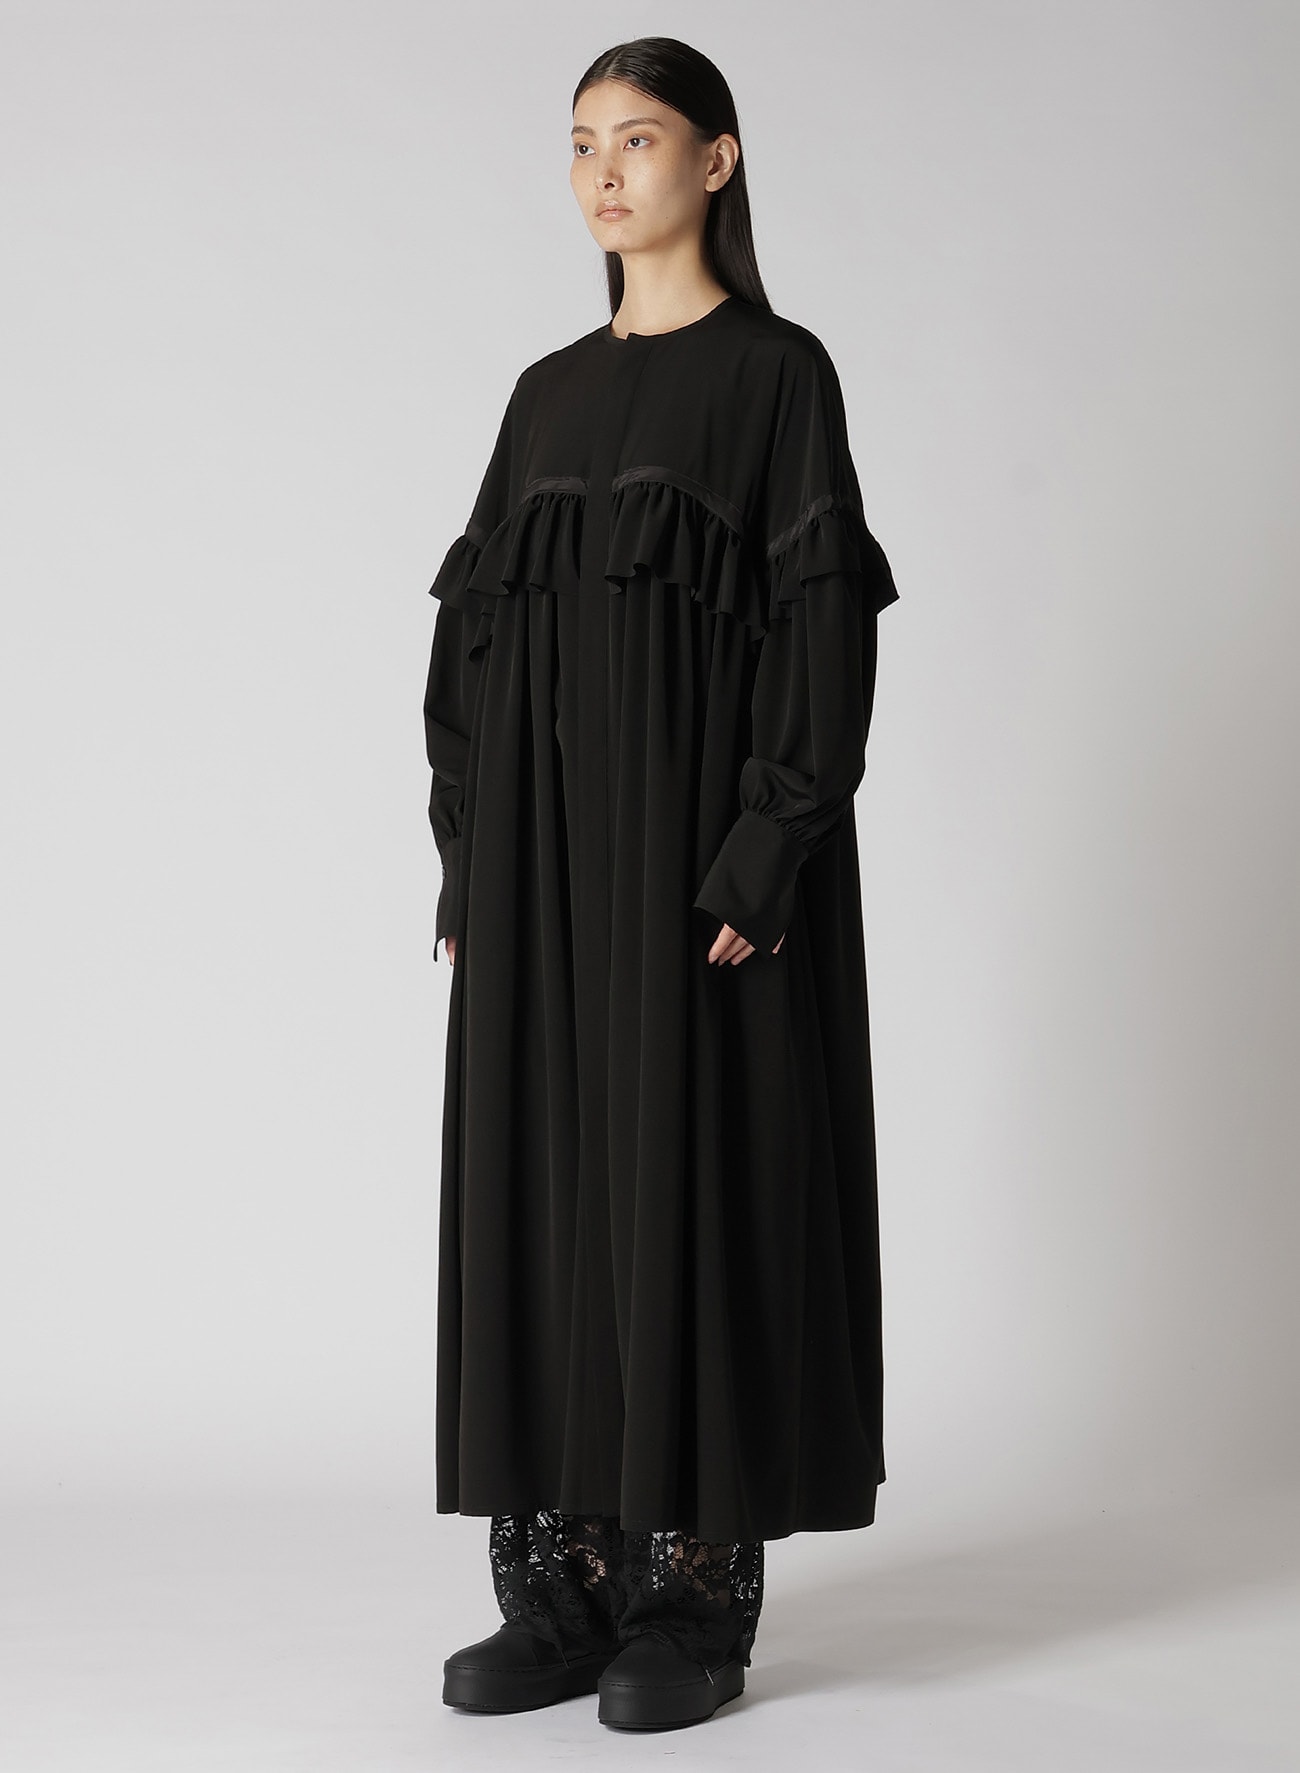 【8/7 12:00 Release】TRIACETATE/POLYESTER RUFFLED DRESS